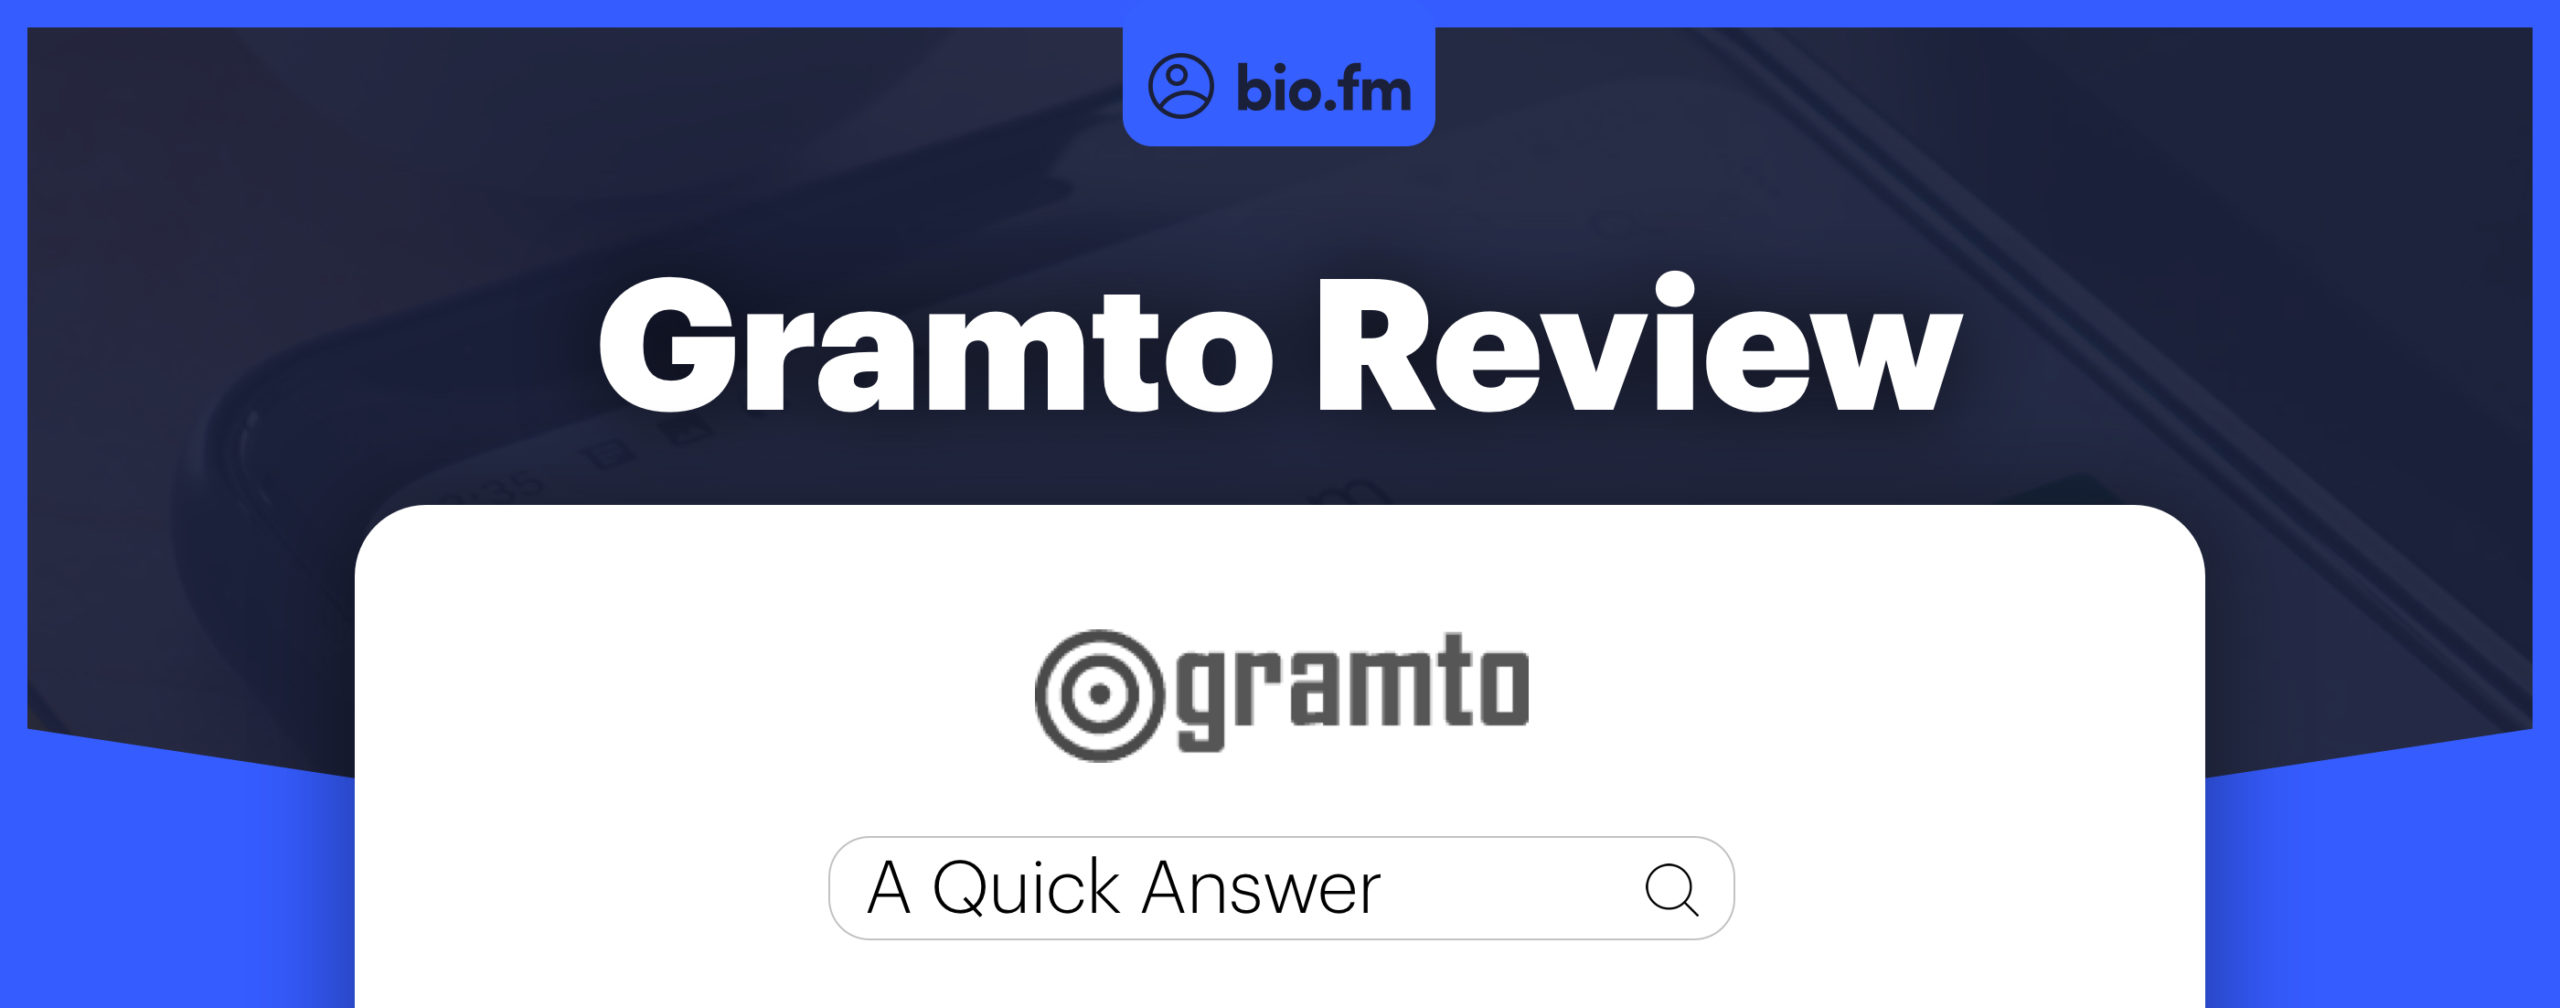 gramto review featured image